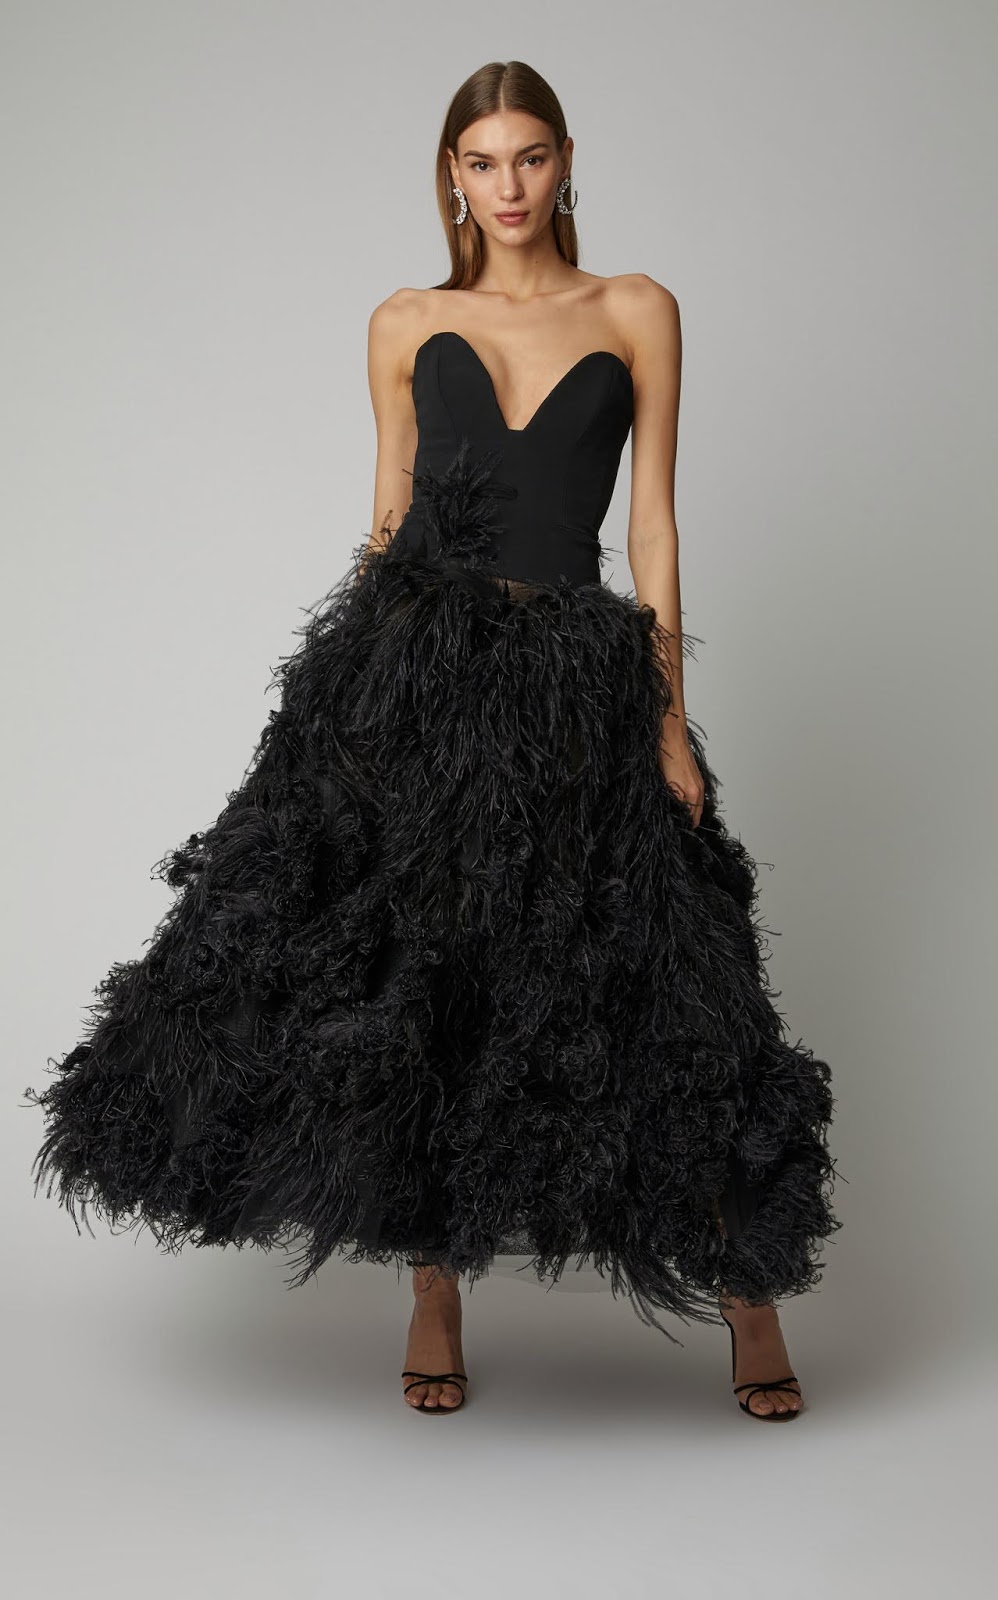 TEN Glamorous and Gorgeous BLACK Dresses for you.